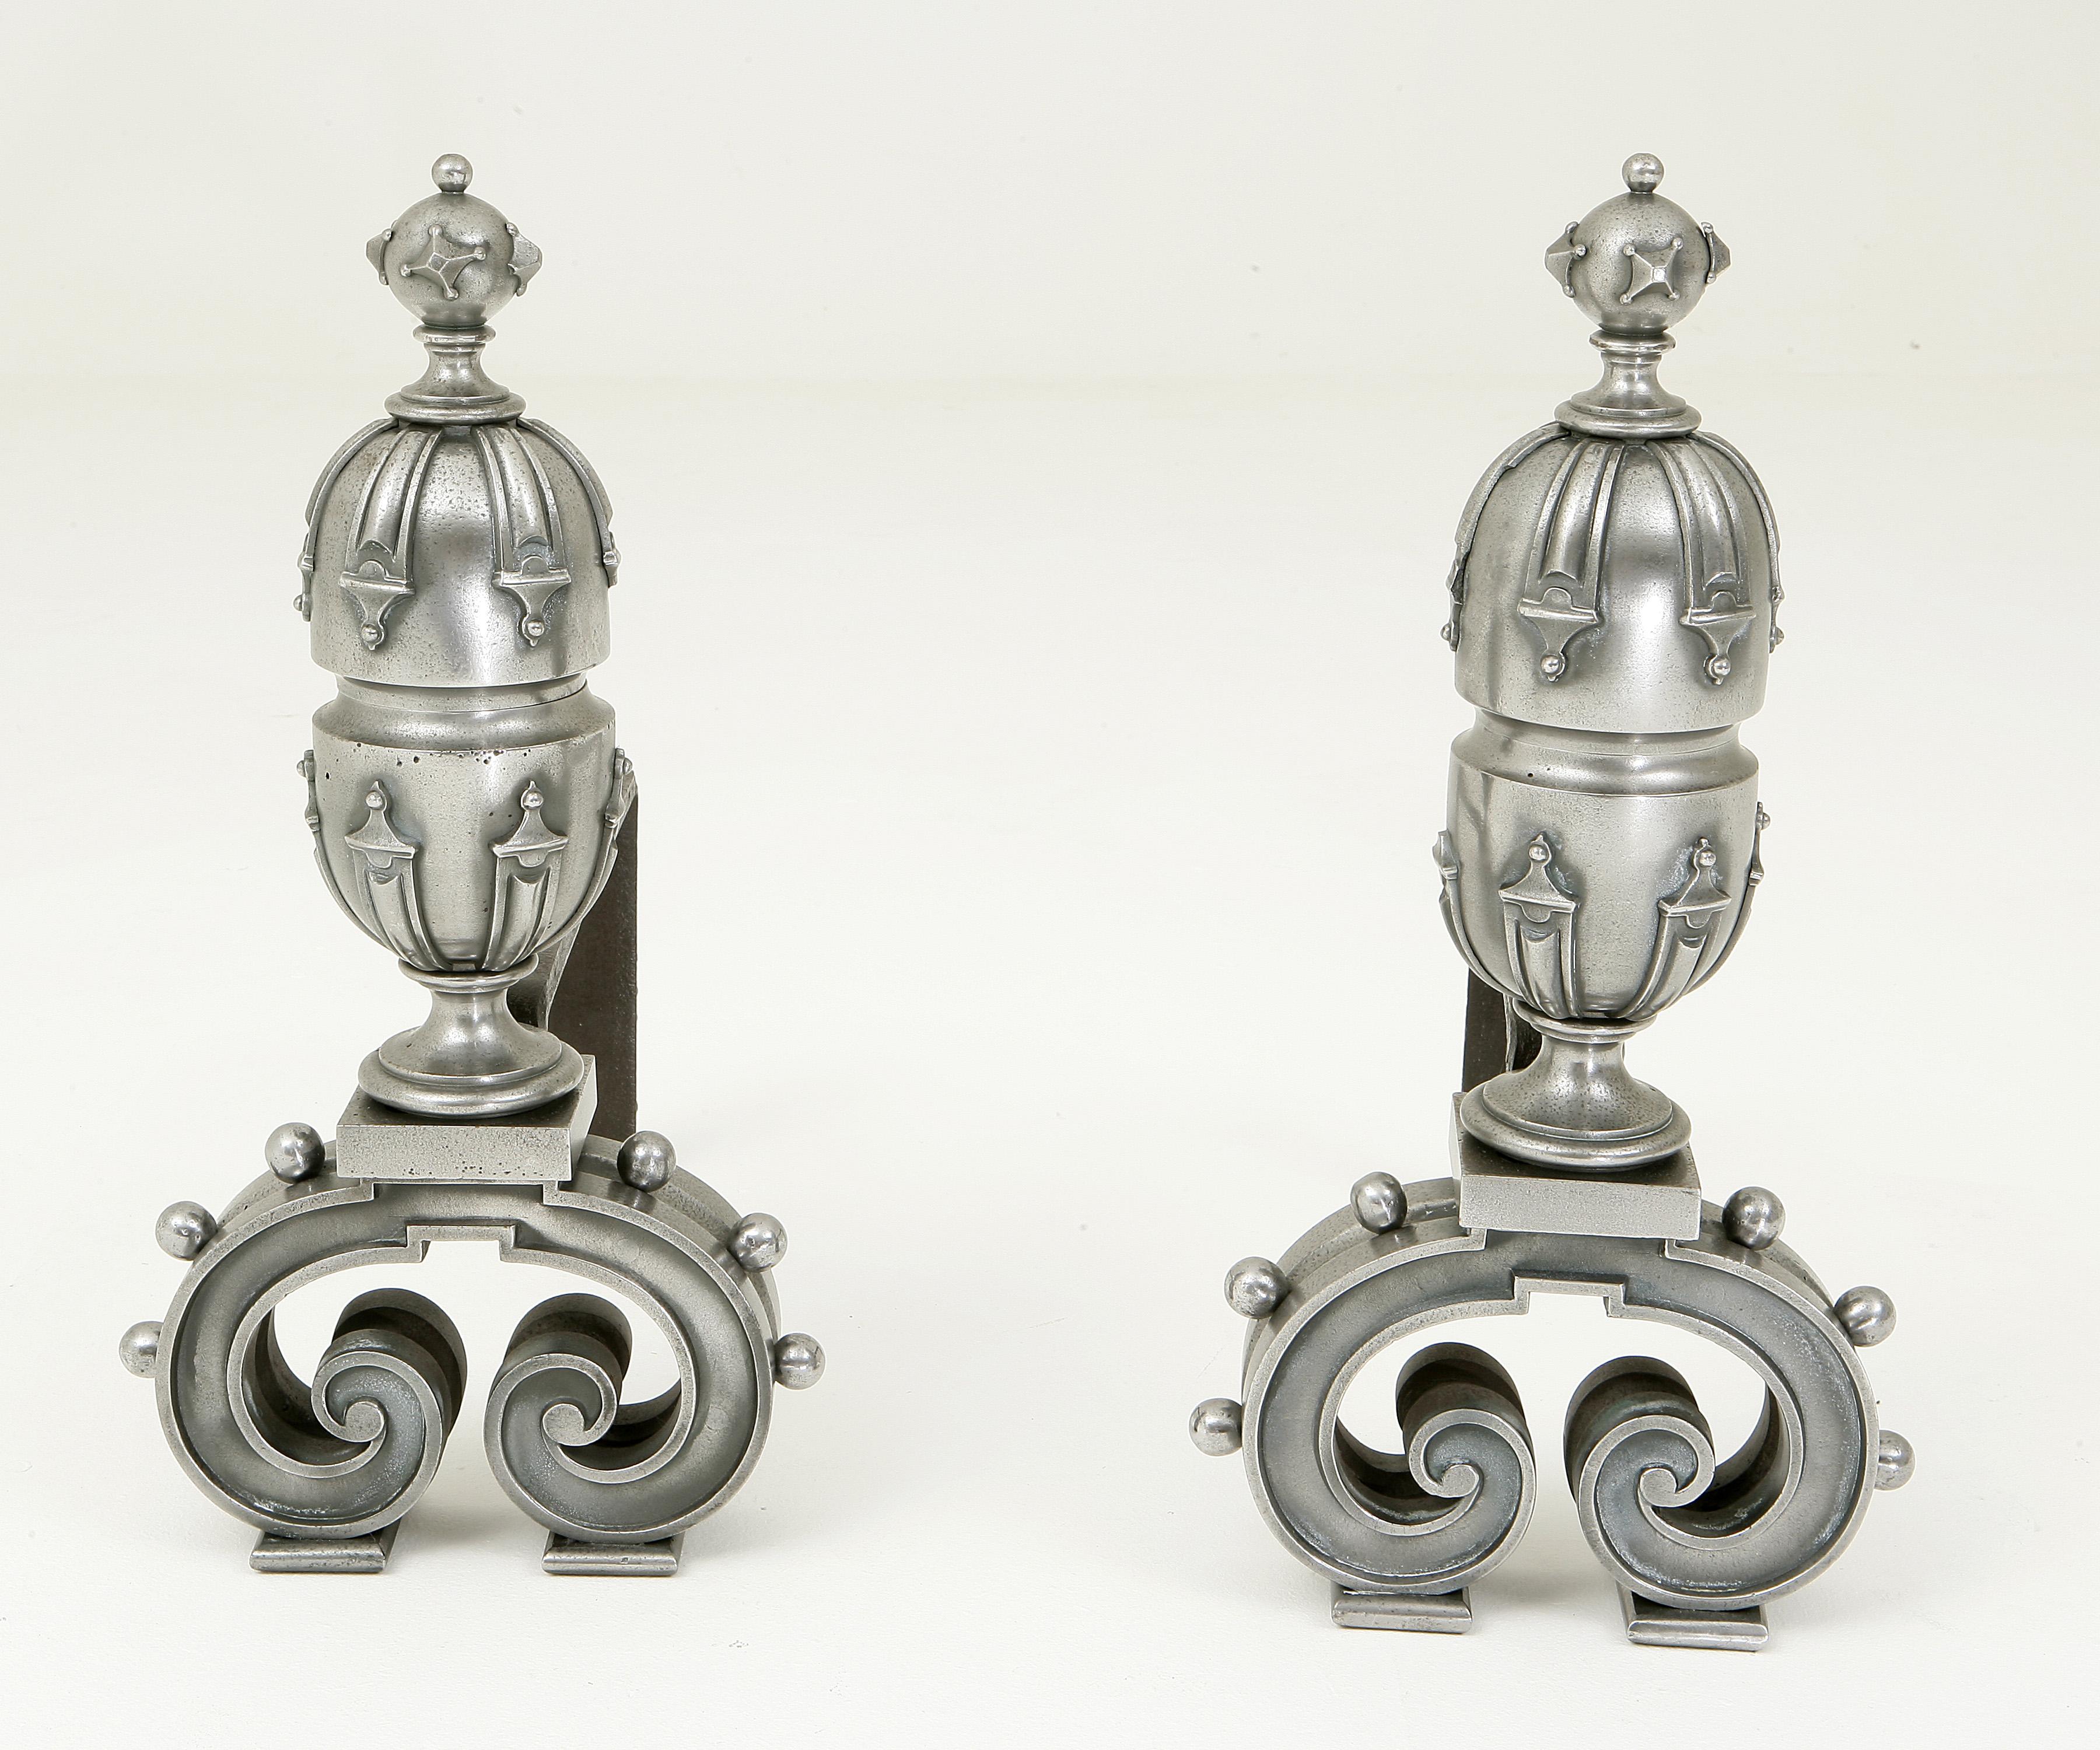 A pair of polished cast iron andirons, in the Elizabethan revival style. English, 1870.